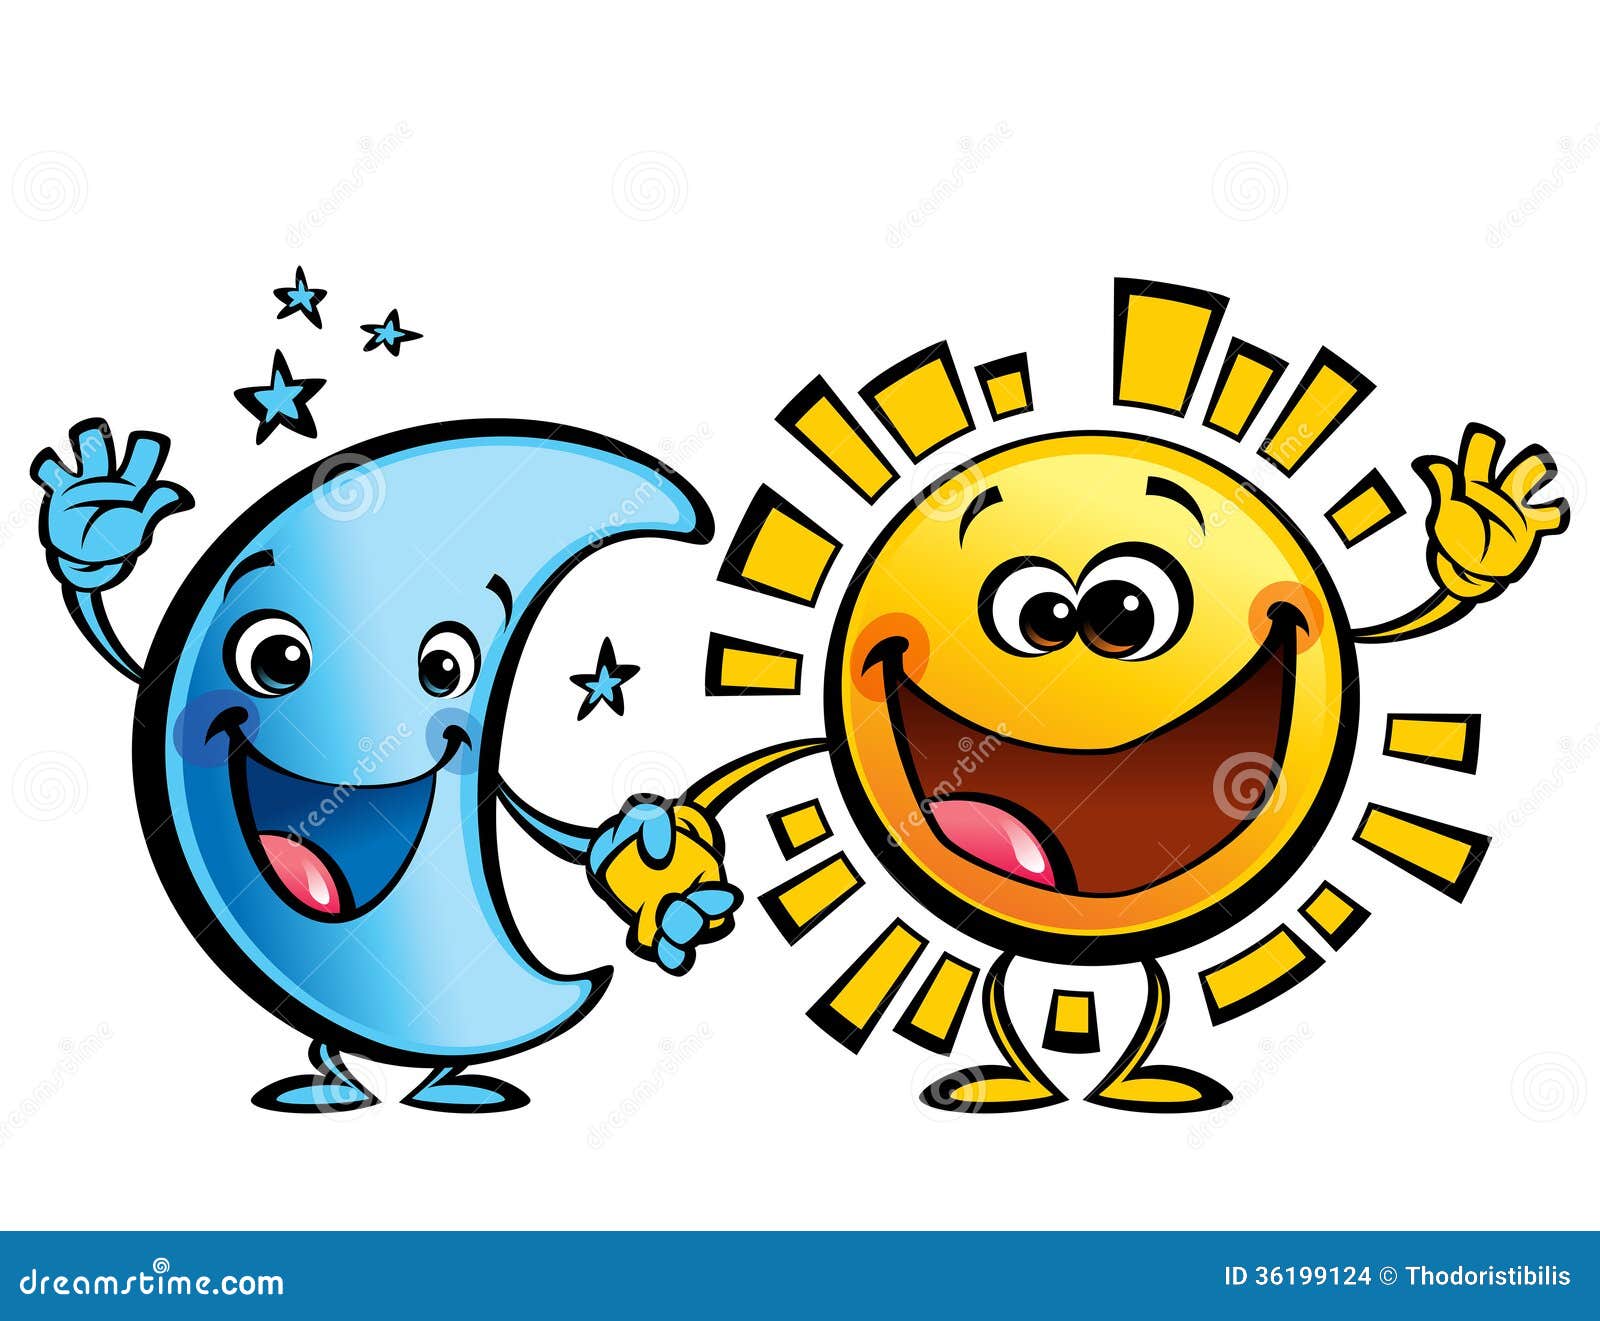 Sun And Moon Best Friends Baby Cartoon Characters Stock Images - Image